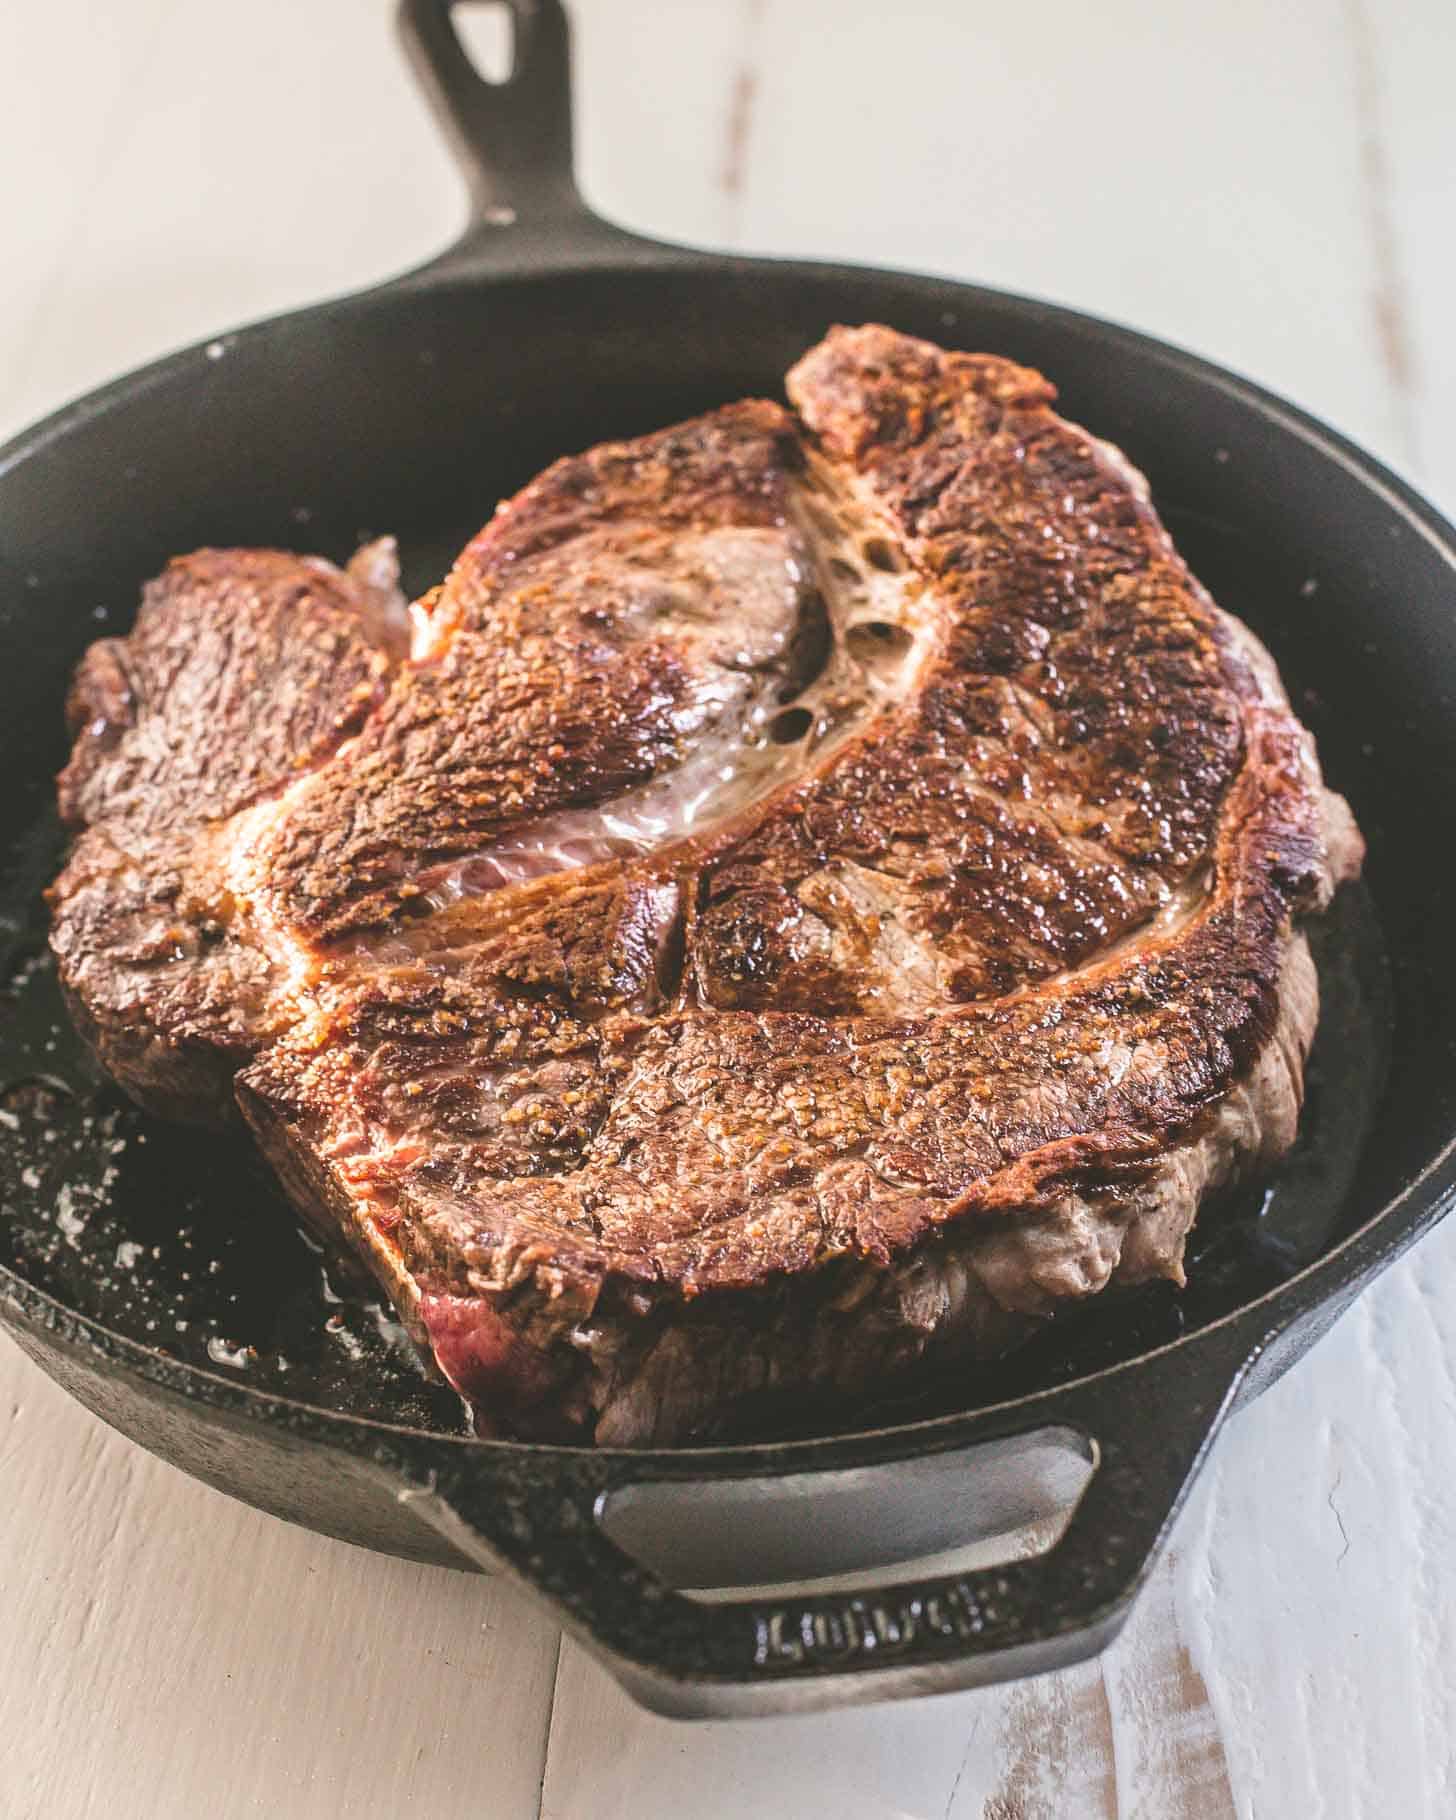 searing a roast in a cast iron skillet